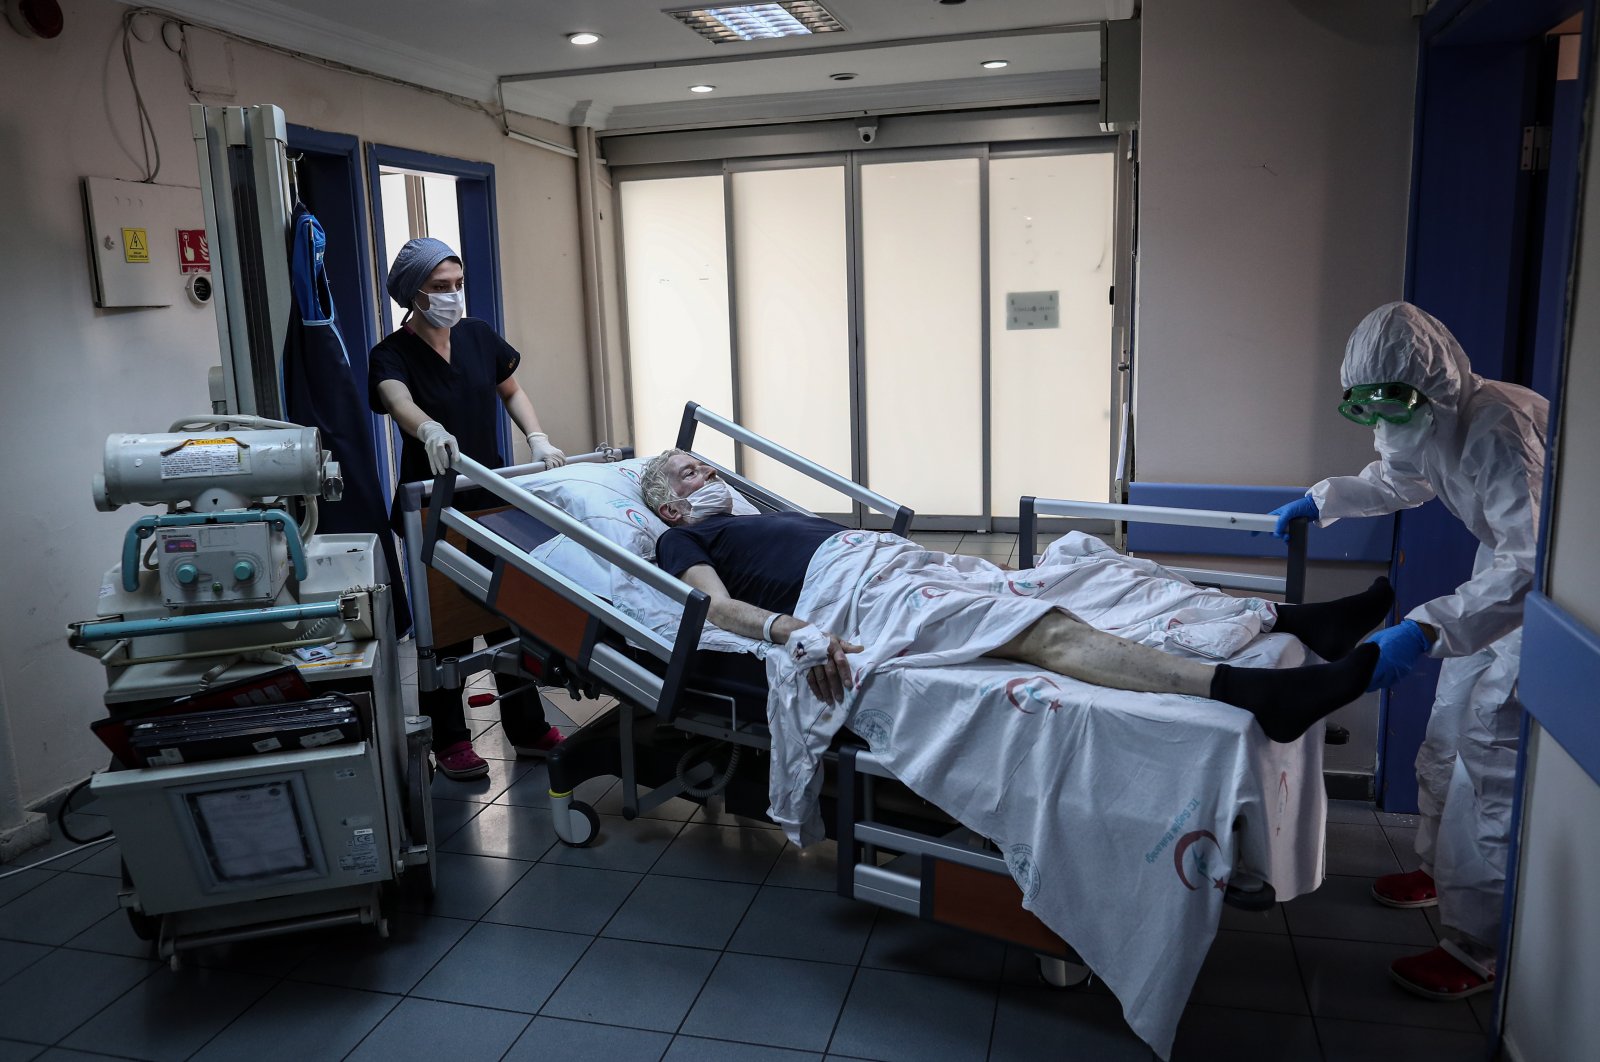 Medical workers push a bed with a patient reportedly infected with COVID-19, at the Istanbul Şişli Hamidiye Etfal Training and Research Hospital, in Istanbul, May 20, 2020. (EPA Photo)